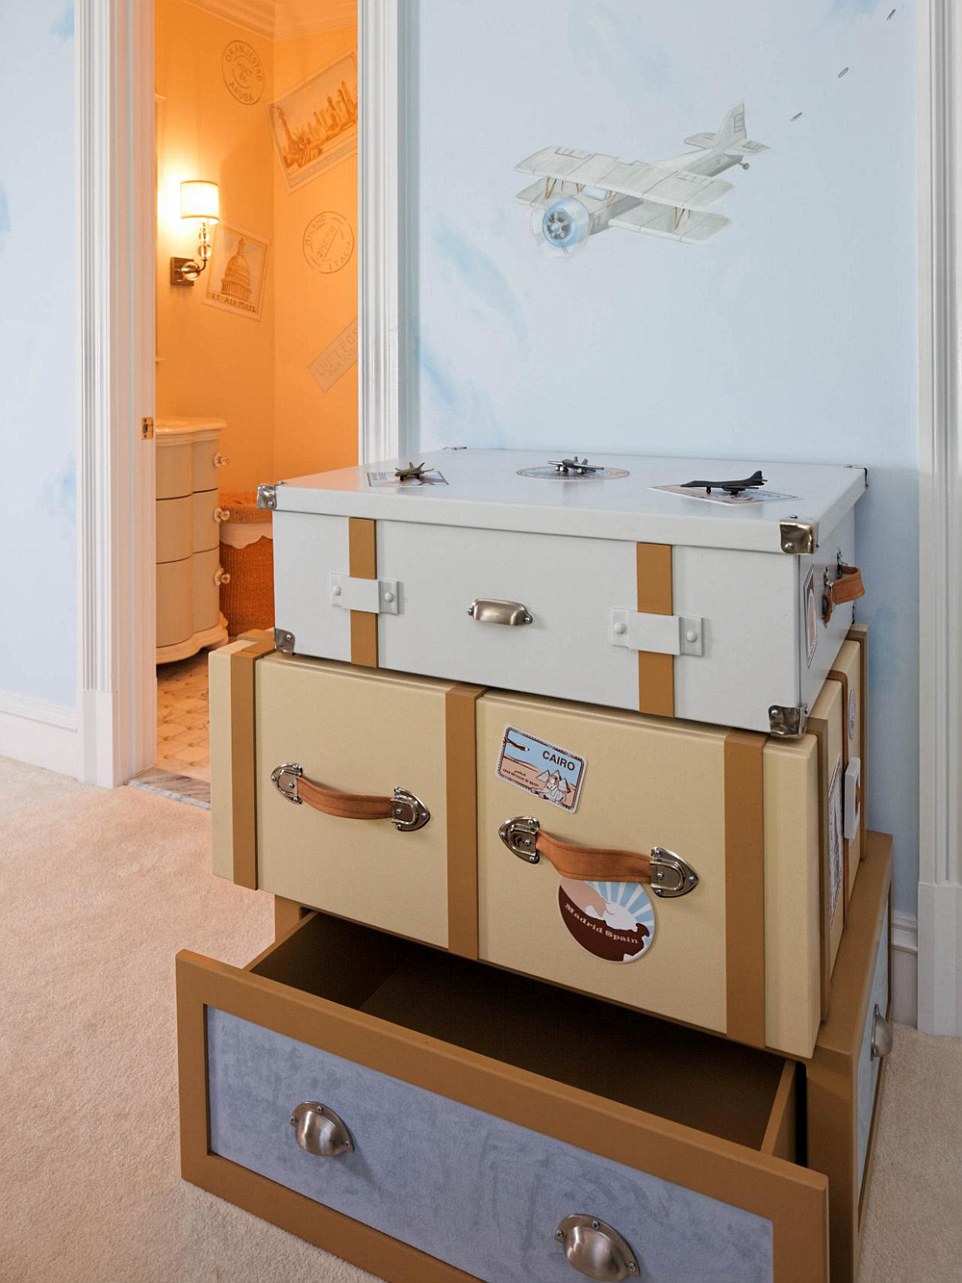 The drawers were designed to mimic luggage and a gas tank.